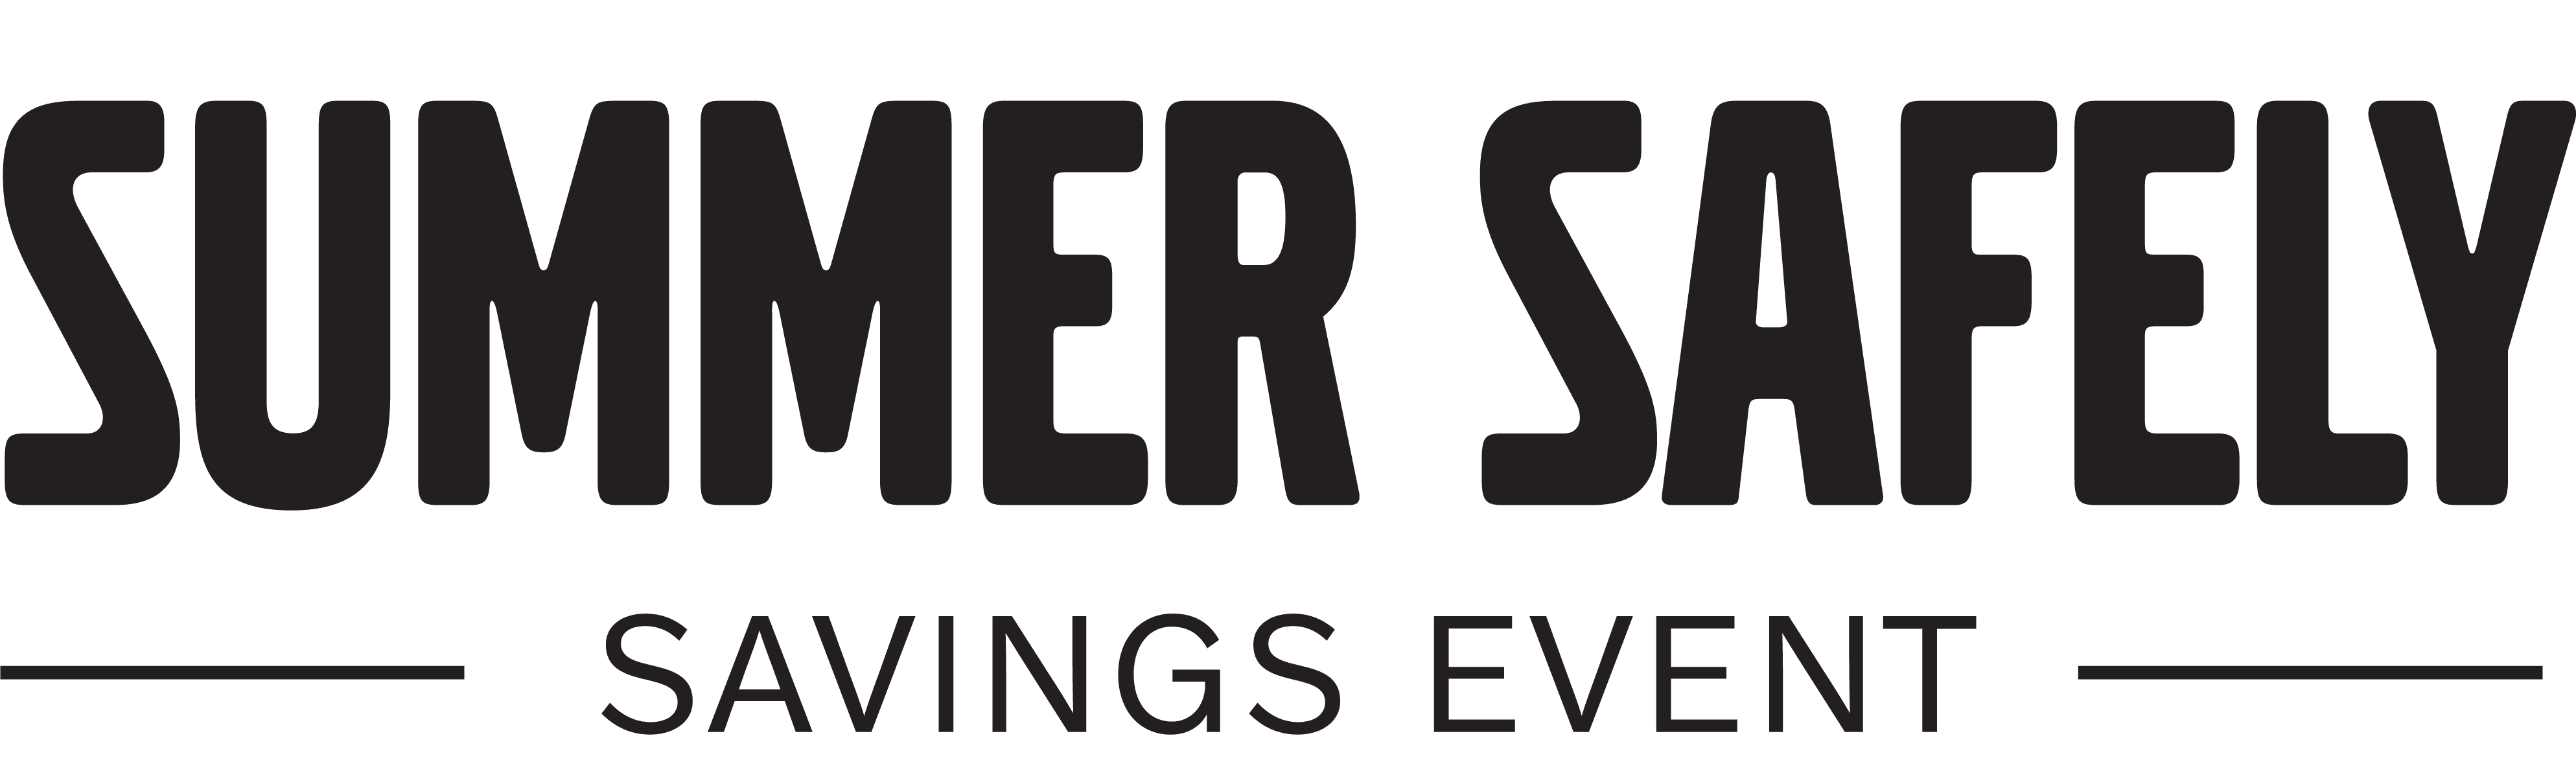 Summer Safely Savings Event